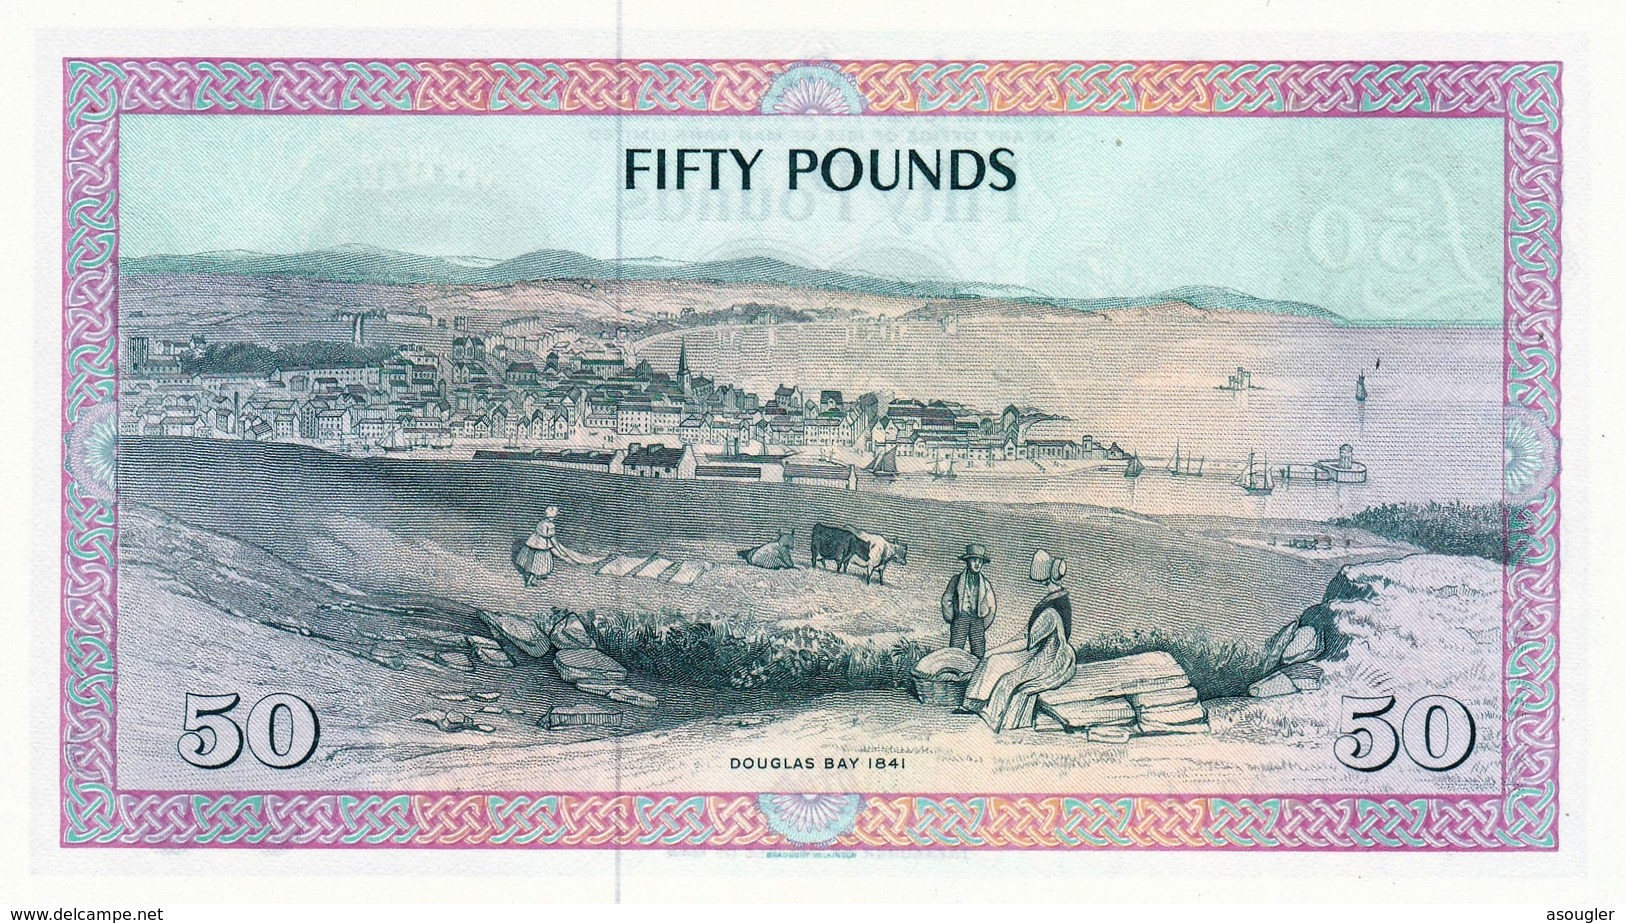 ISLE OF MAN 50 POUNDS ND 1983 UNC P-39a "free Shipping Via Registered Air Mail" - 50 Pounds